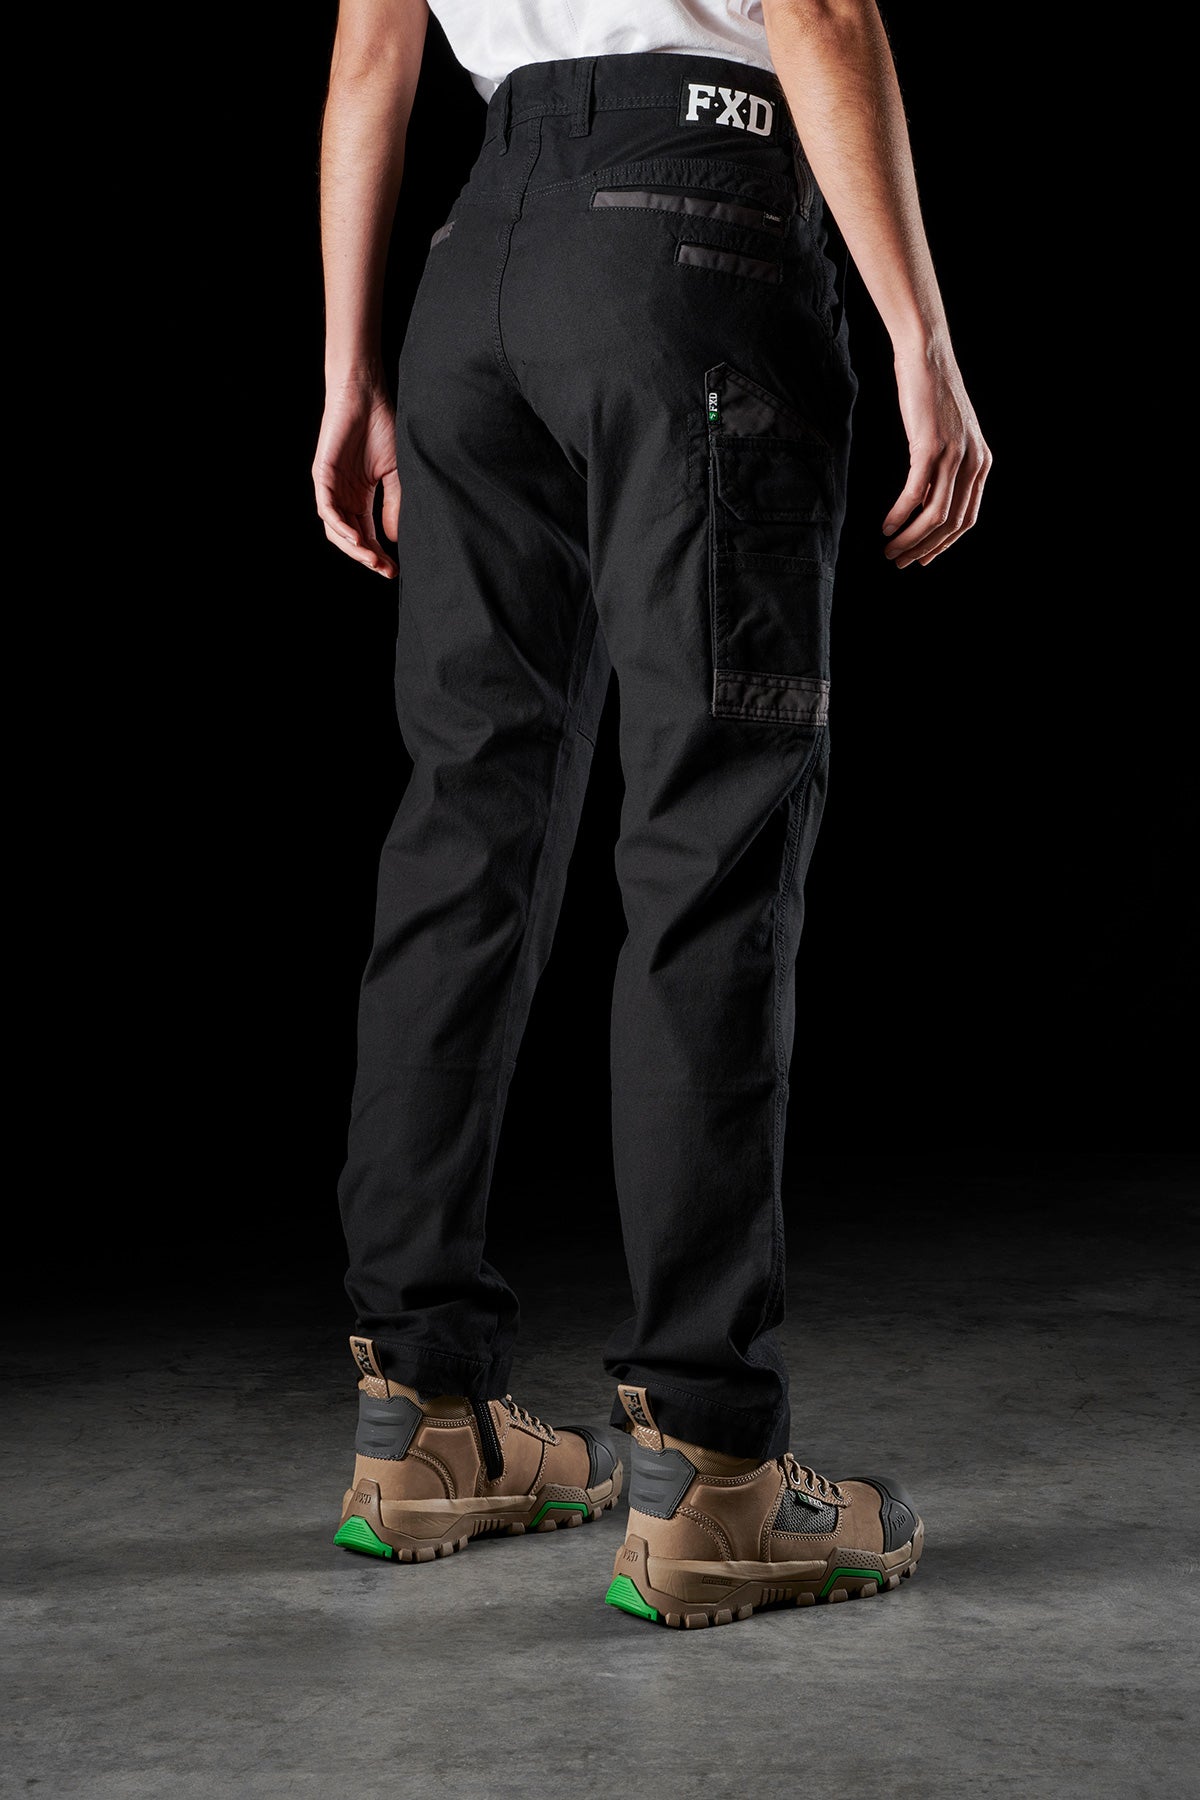 New in from Oz the FXD WP-1 Slim Fit Knee pad Work trousers made from 100%  Cotton watch my Review - YouTube